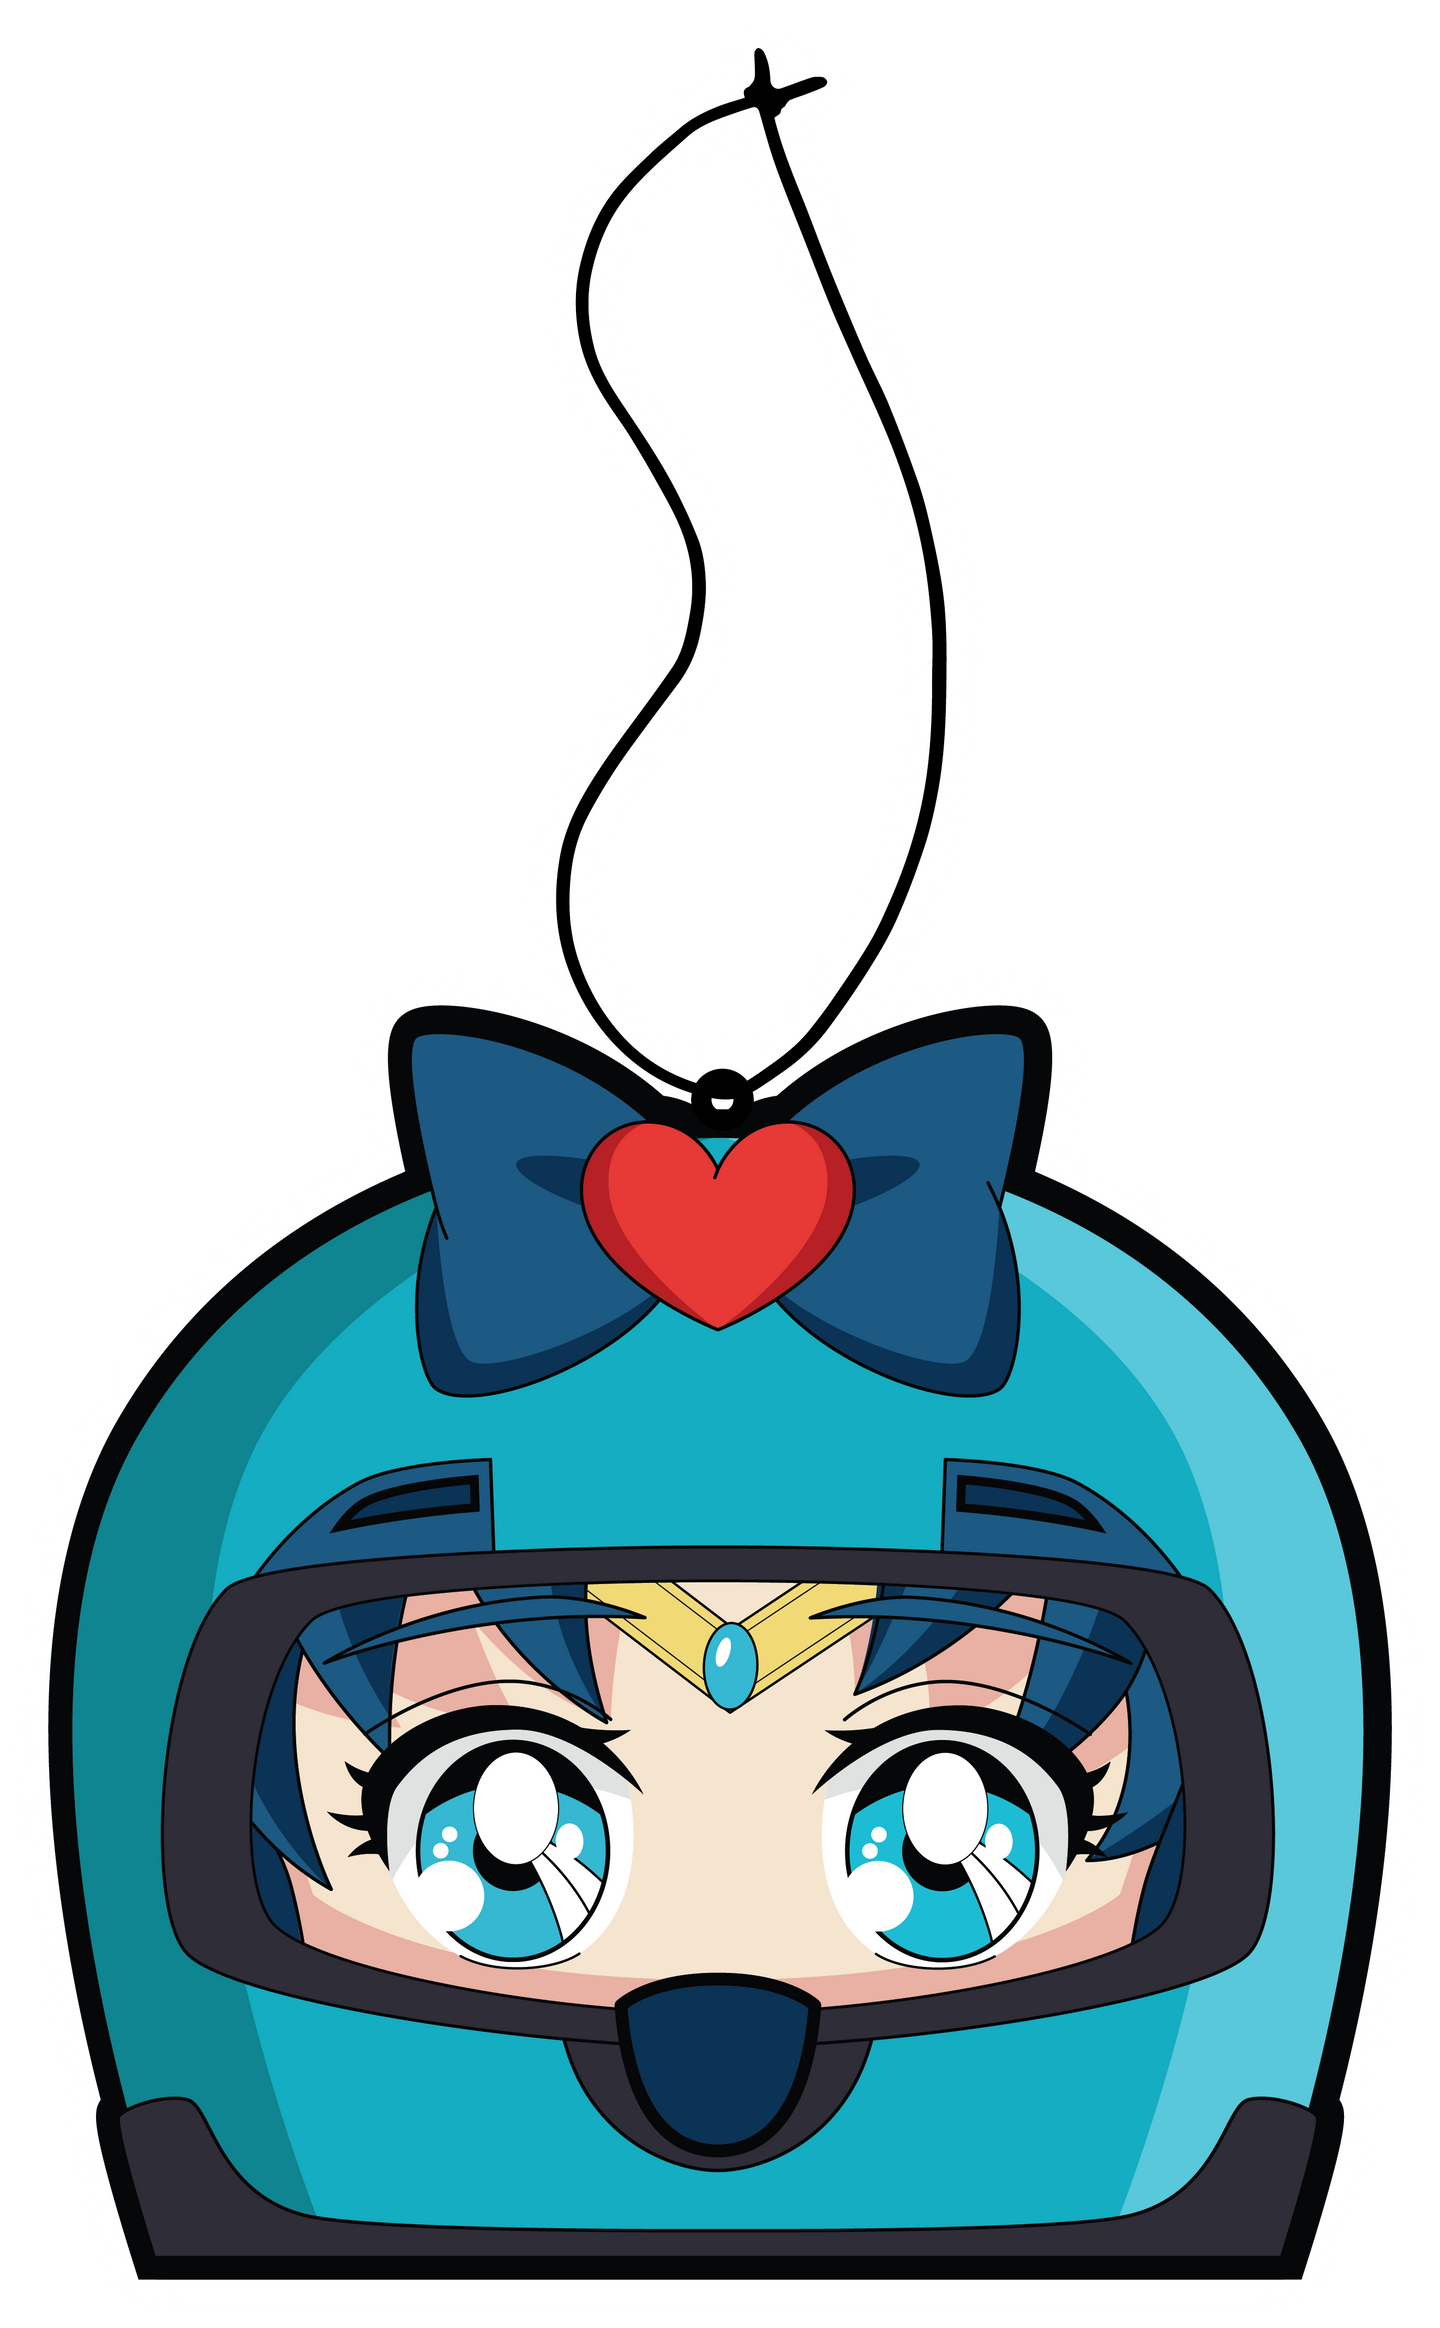 Sailor Moons friend sailor mercury air freshener hanging from black string. Wearing blue helmet with blue bow and red heart on blue eyed blue hair japanese anime girl.